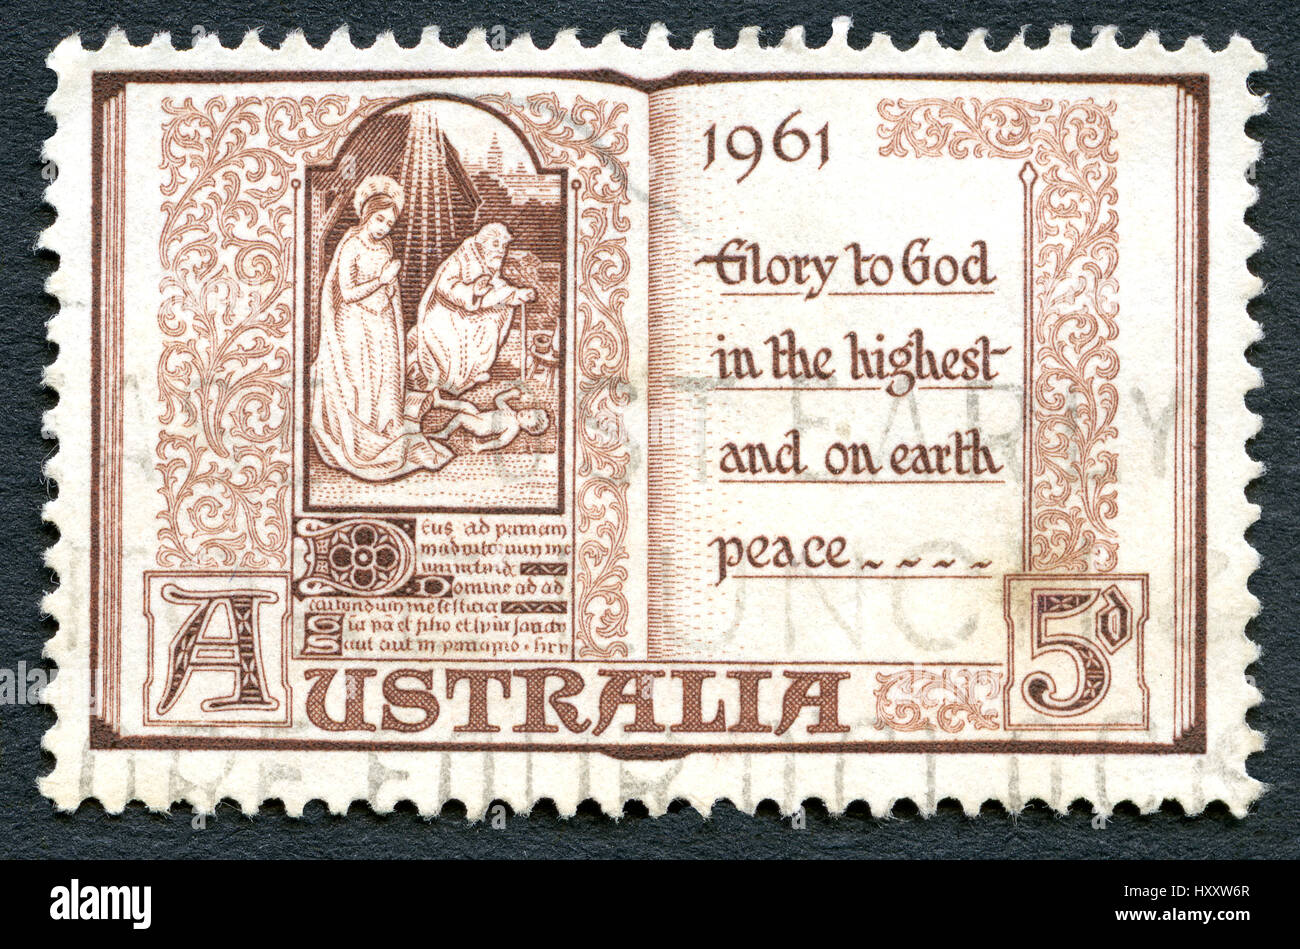 AUSTRALIA - CIRCA 1961: A used postage stamp from Australia, depitcing a festive illustration and message to commemorate Christmas, circa 1961. Stock Photo